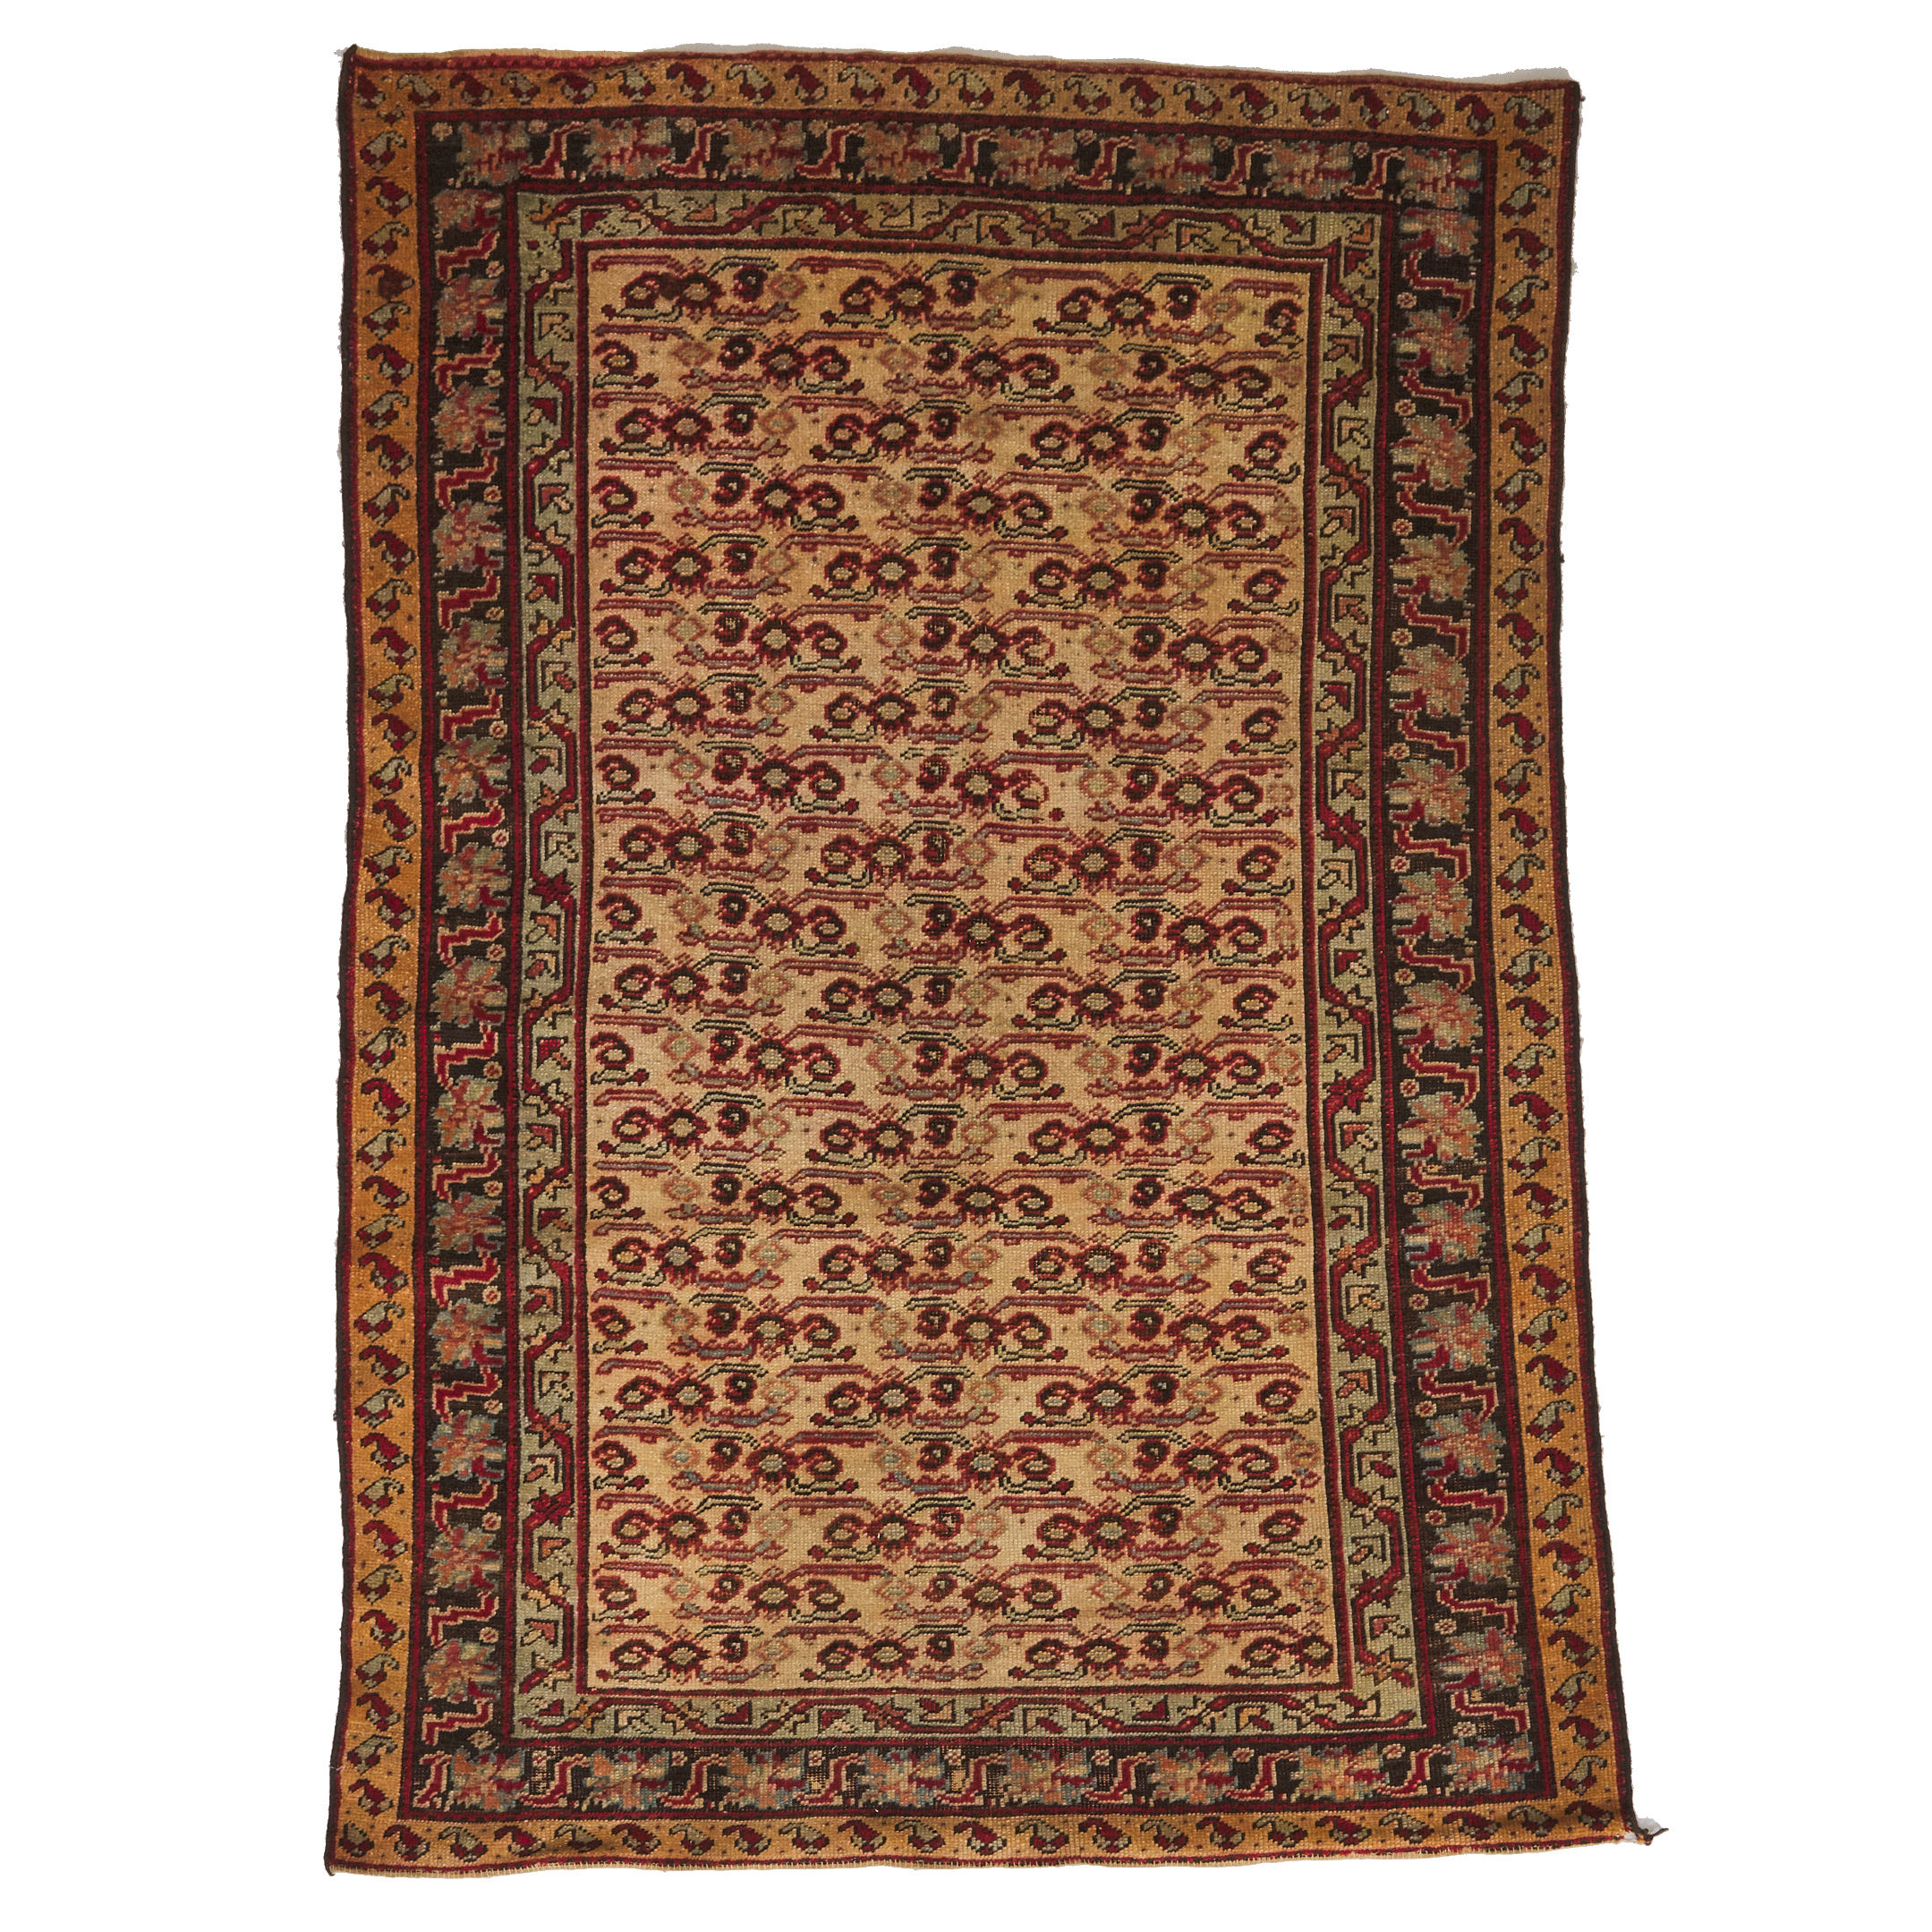 North Persian Rug, possibly Malayer, c.1930/40